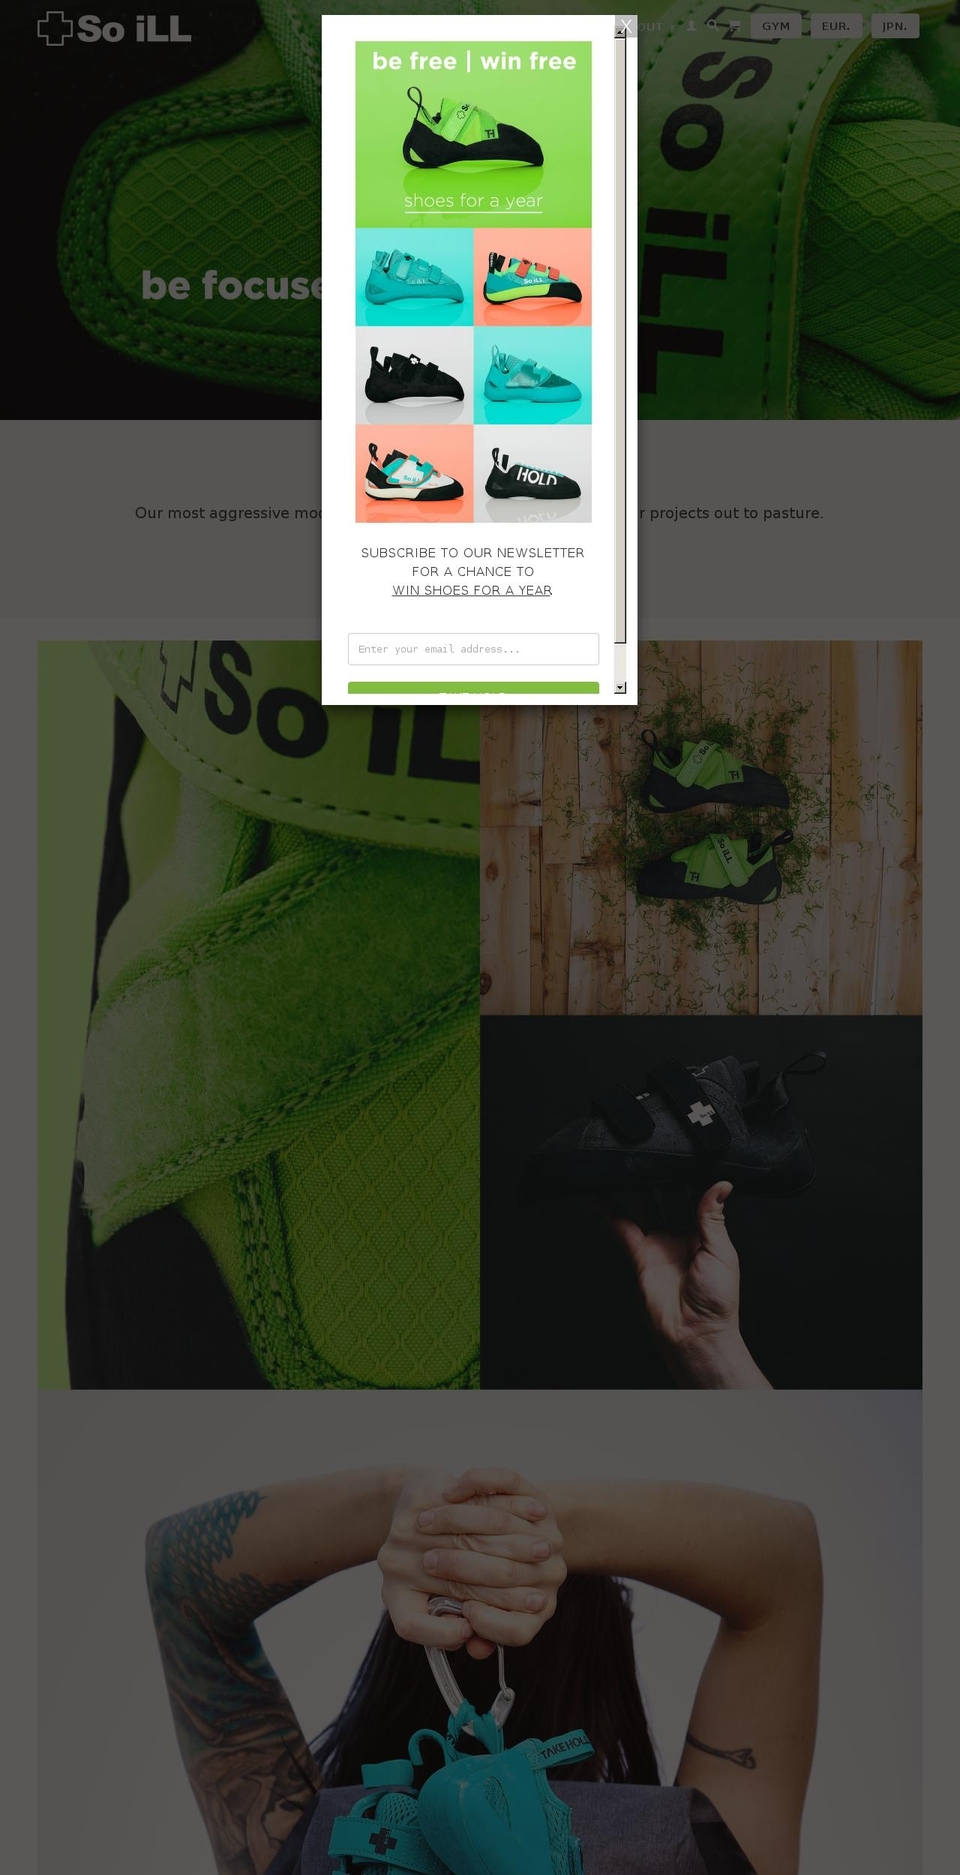 Launch Shopify theme site example soillholds.com